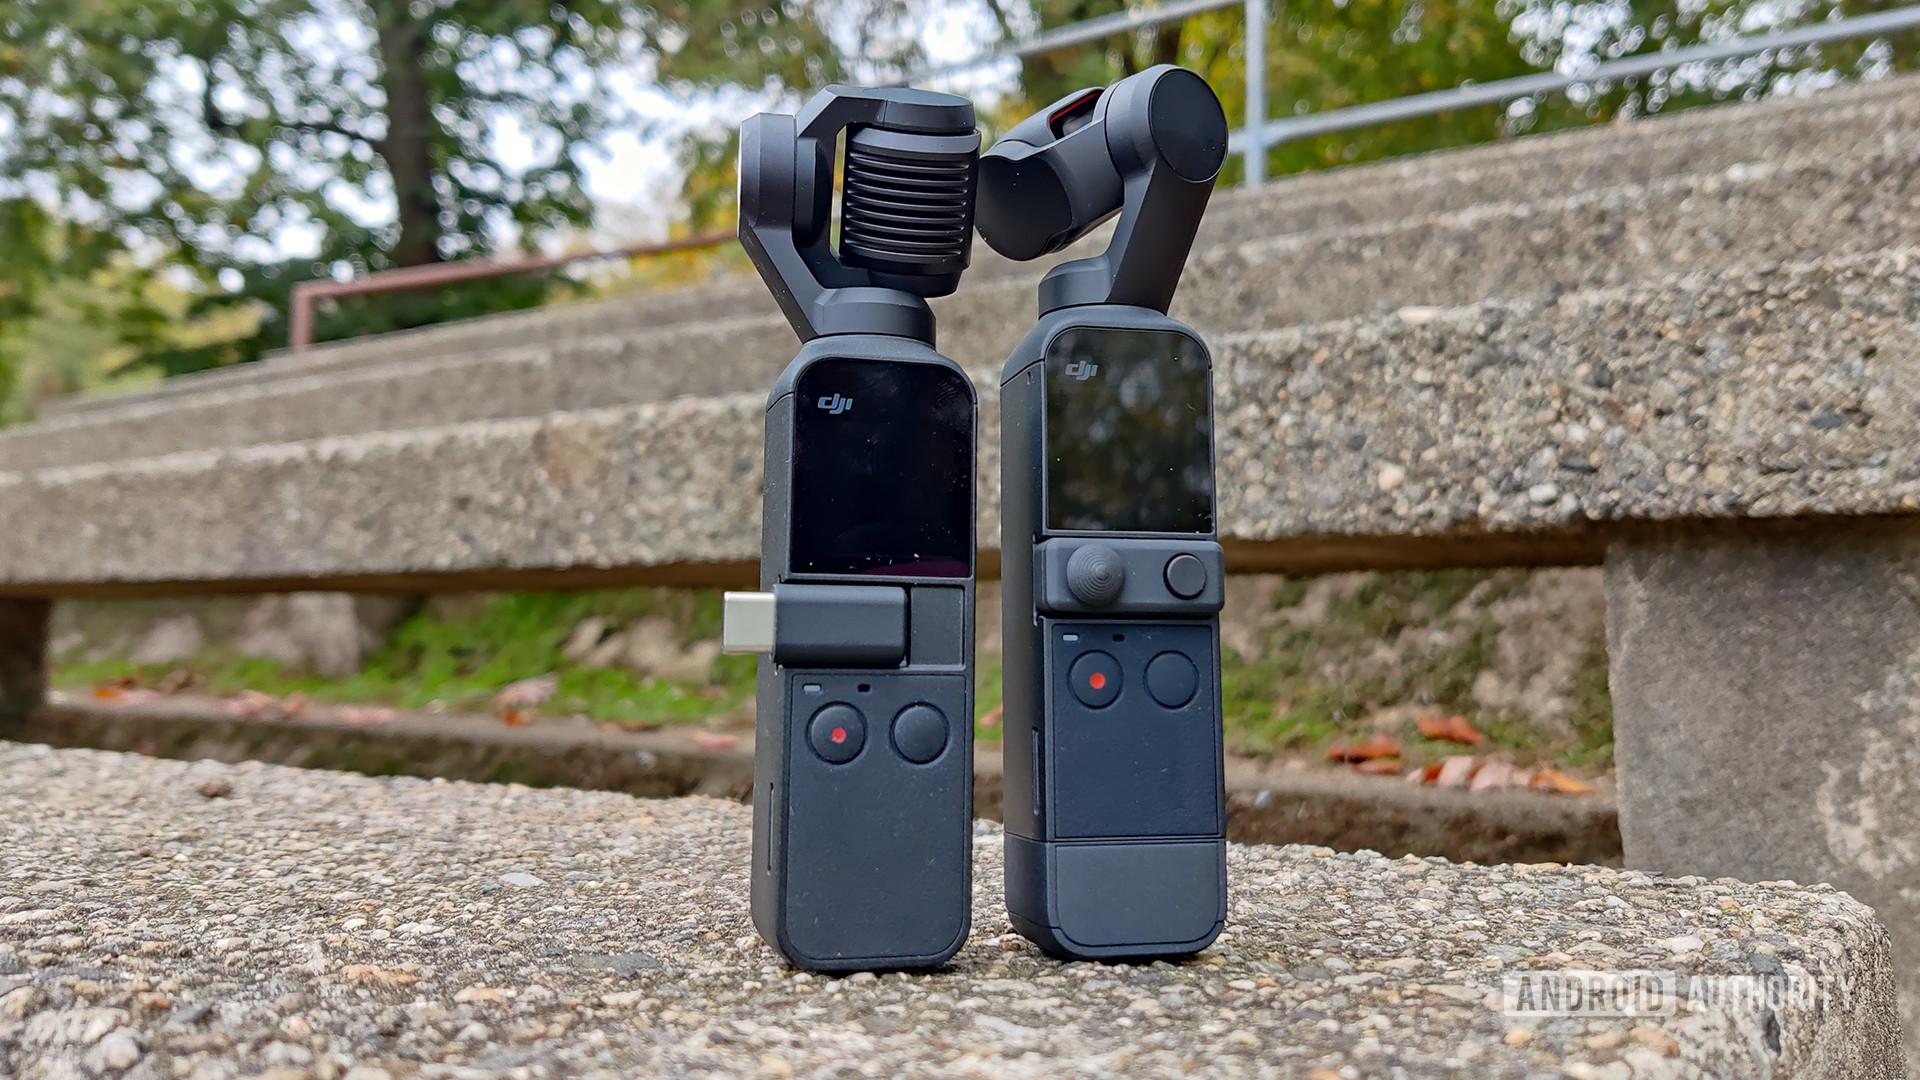 fast Glimte Ib DJI Pocket 2 review: Better than the original - Android Authority